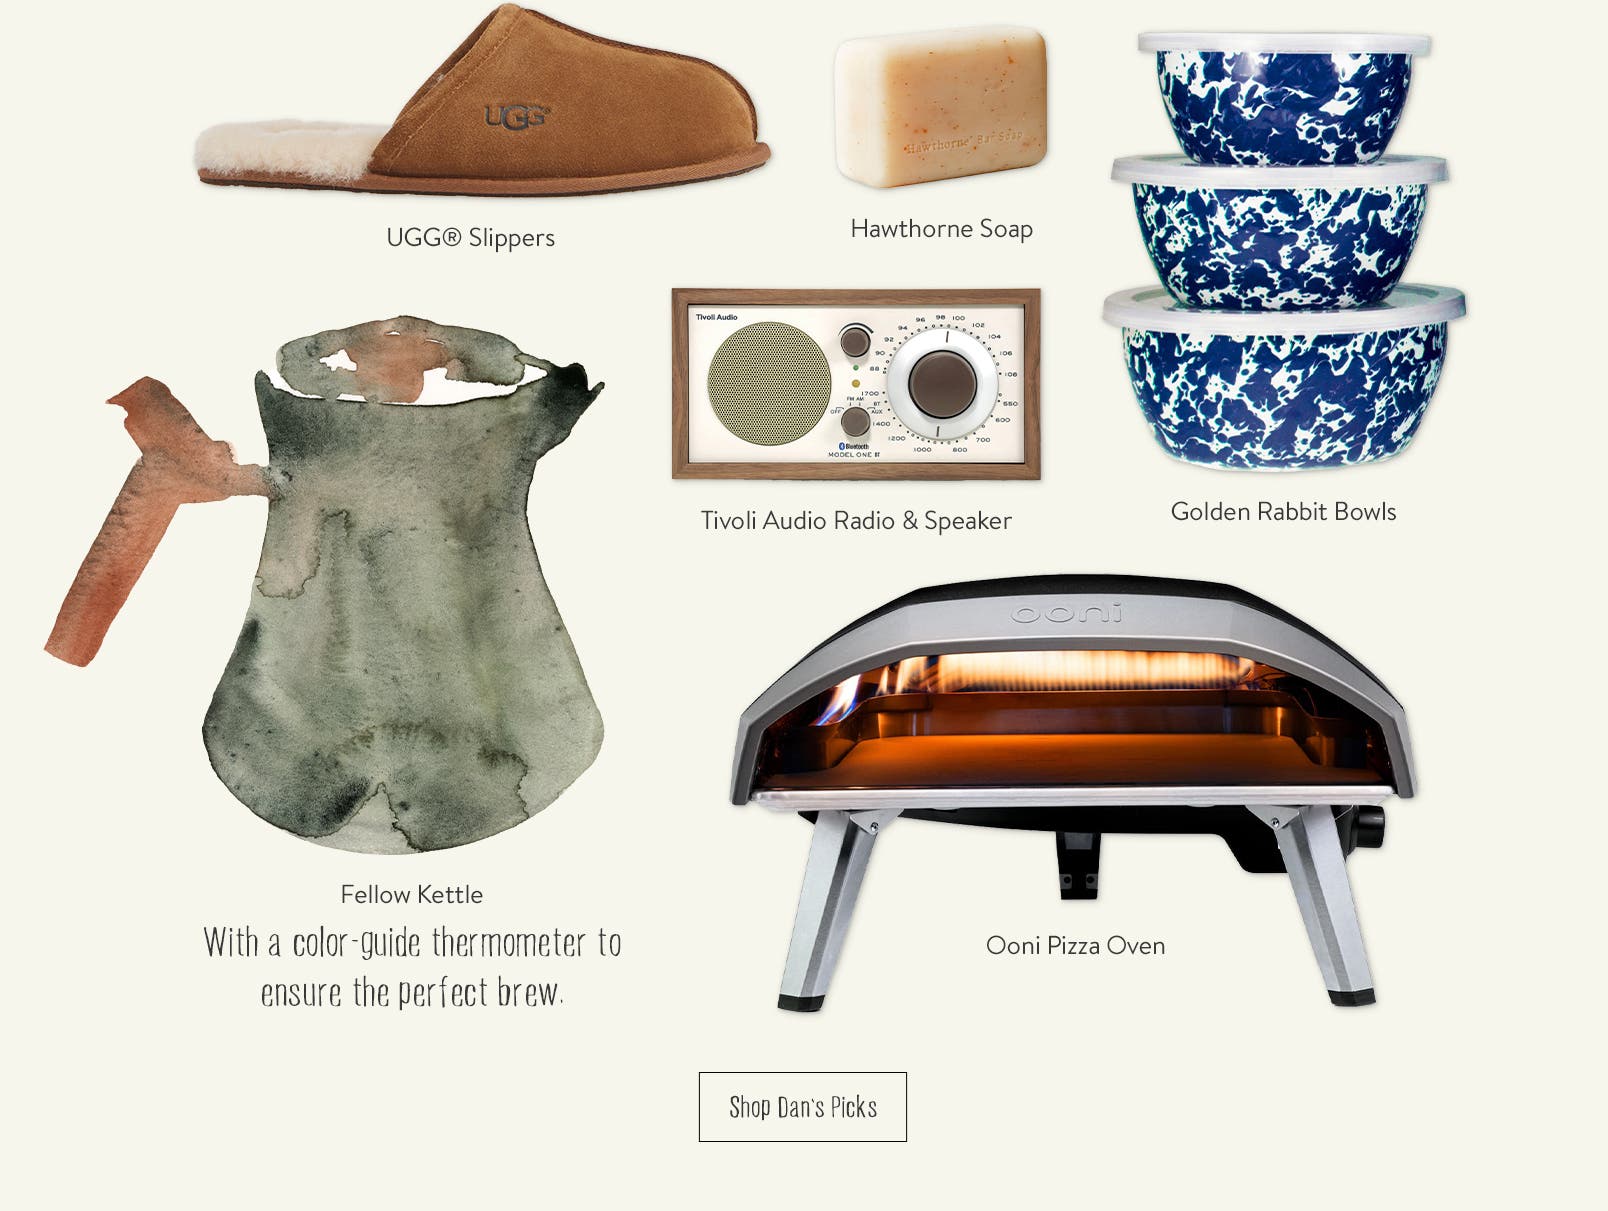 Father's Day gift picks, including cookware, kitchenware and fragrance.